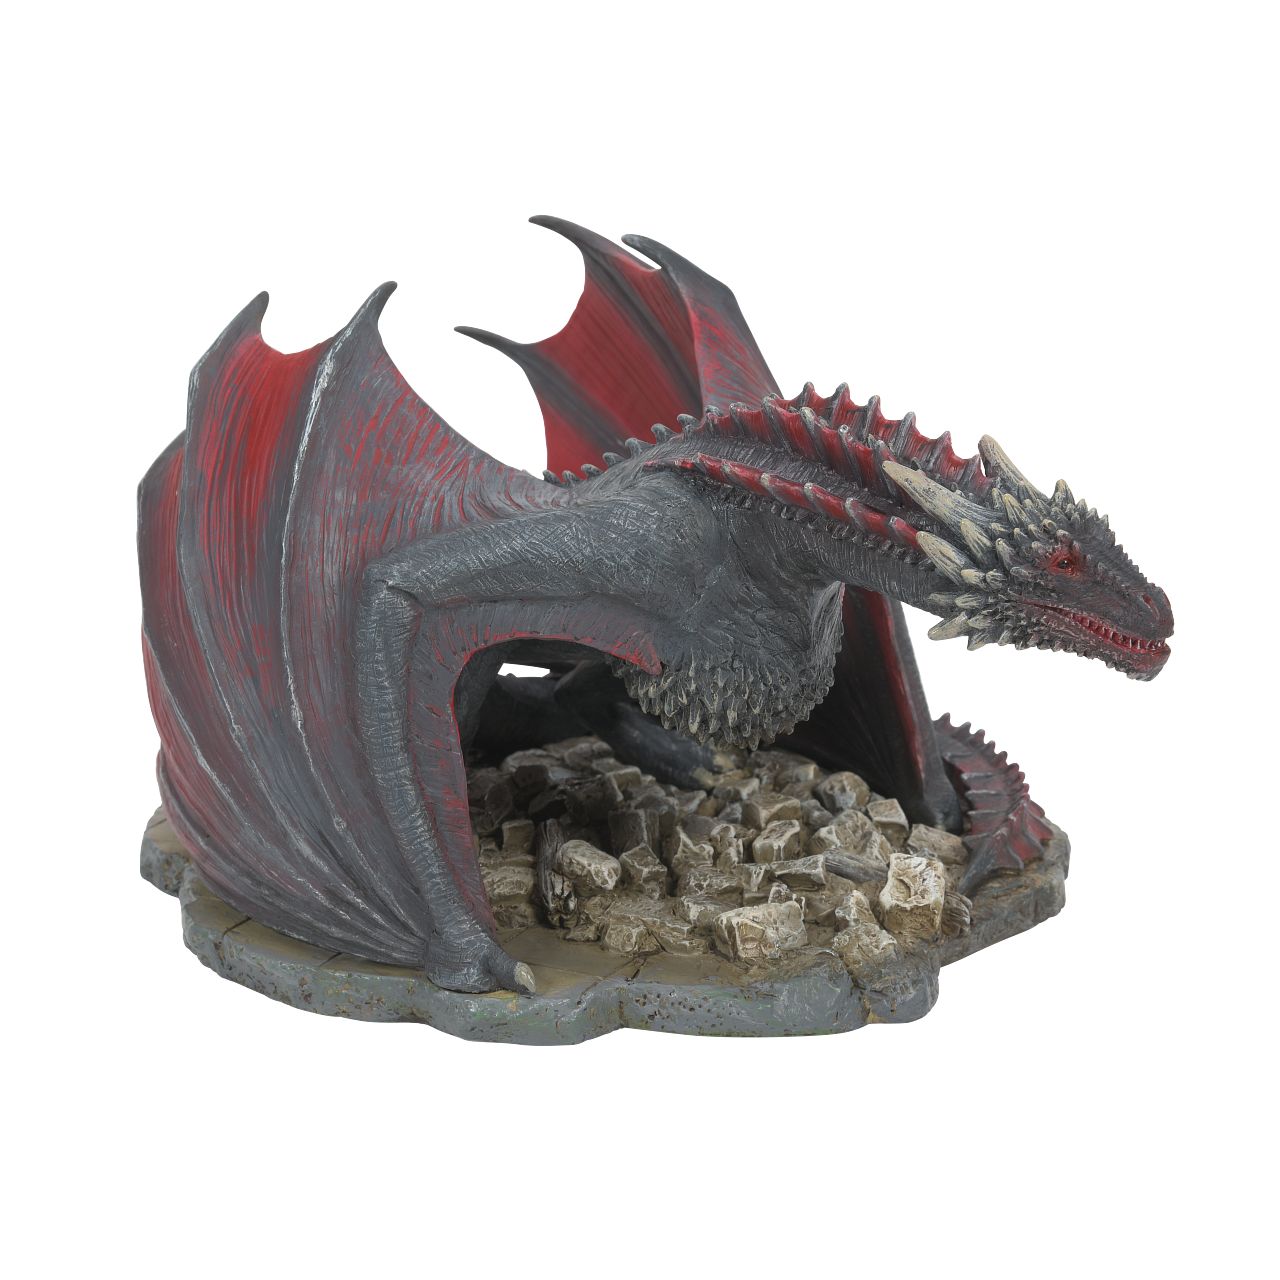 Department 56 Game of Thrones Drogon Figurine  This figurine is of Drogon, the largest and fiercest of the three in Game of Thrones. Hand crafted from high quality cast stone, hand painted. Crafted with the TV realness of Game of Thrones TV series. Packaged in a branded gift box, this is a decoration not a toy.